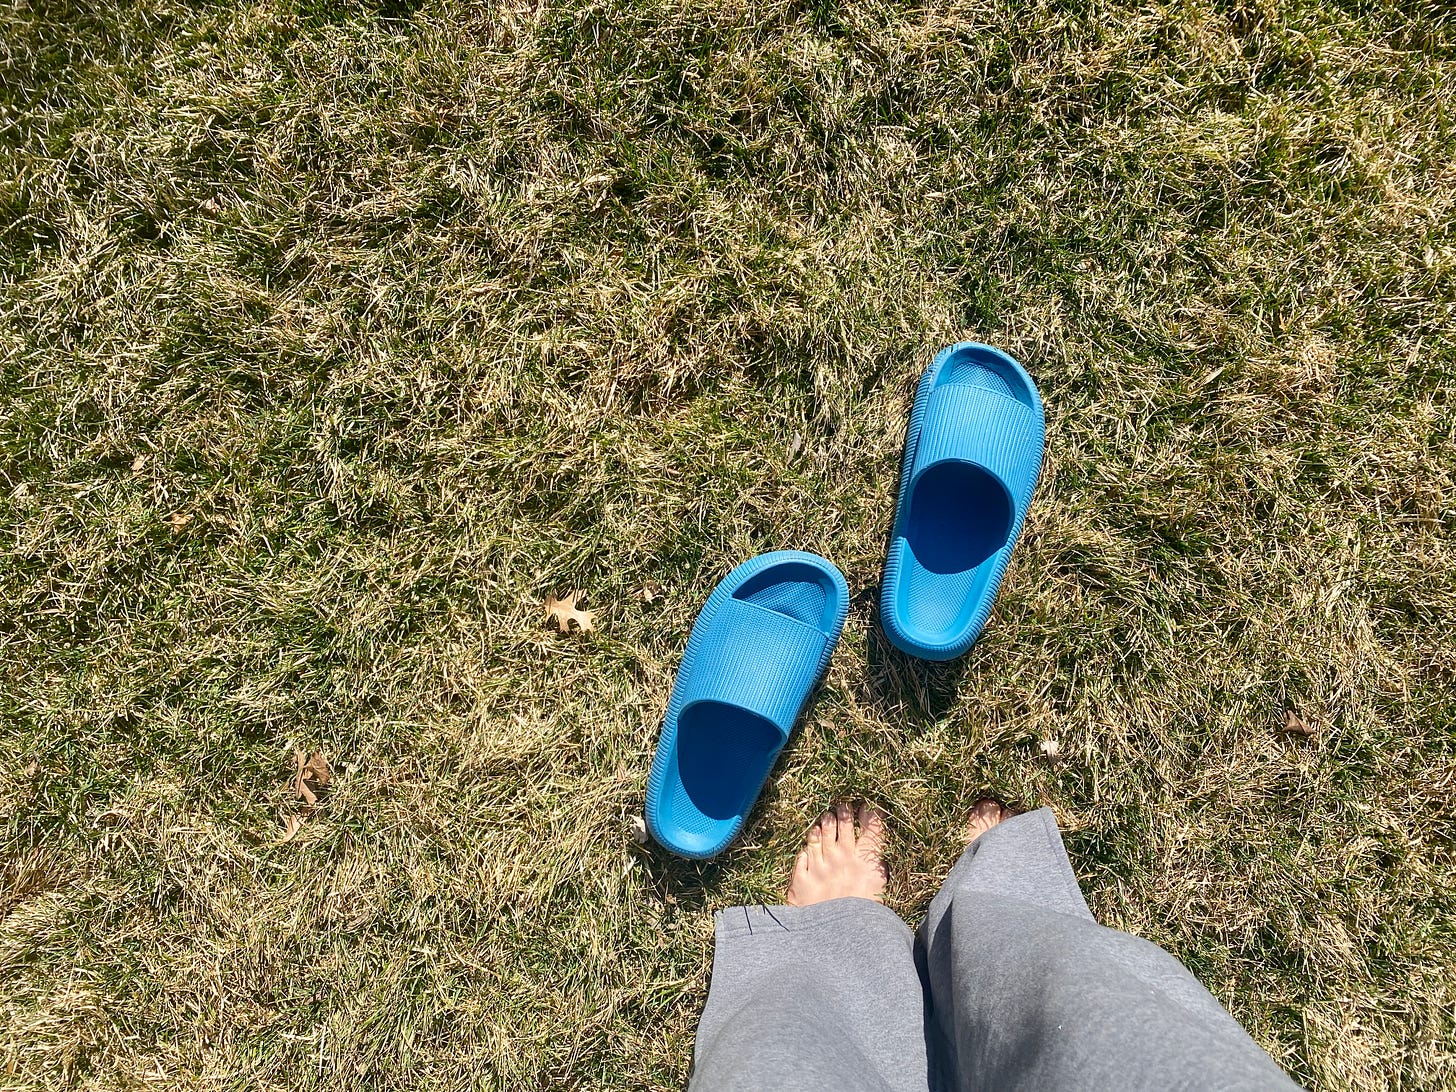 A landscape-oriented photograph of grass. In the bottom right, a person's legs in gray sweatpants and bare feet are viewable. In front of the feet are two medium blue slides sitting in the grass. The photo is of me while I'm grounding, also called earthing, but walking barefoot in grass